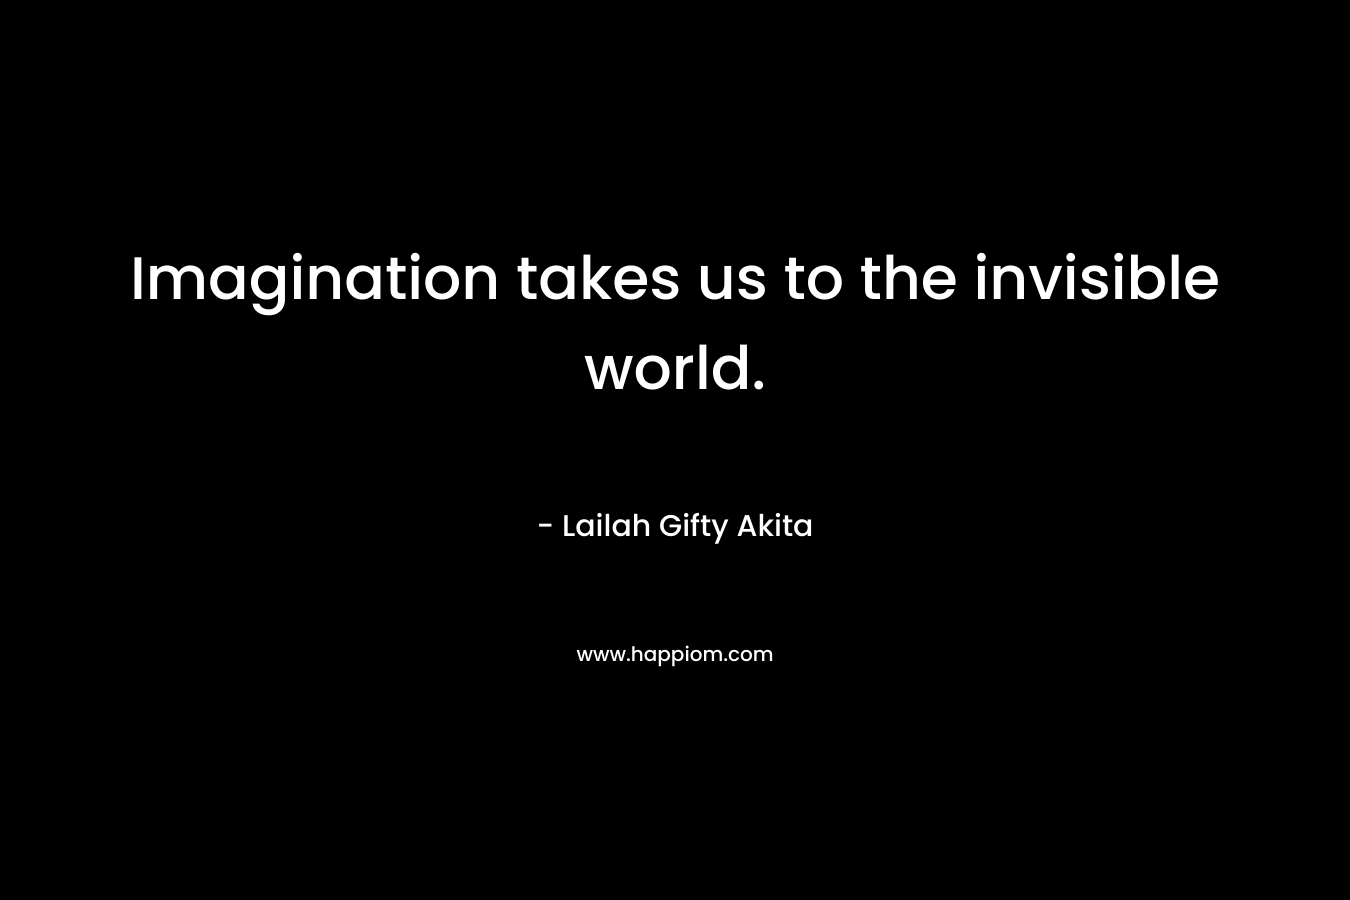 Imagination takes us to the invisible world.